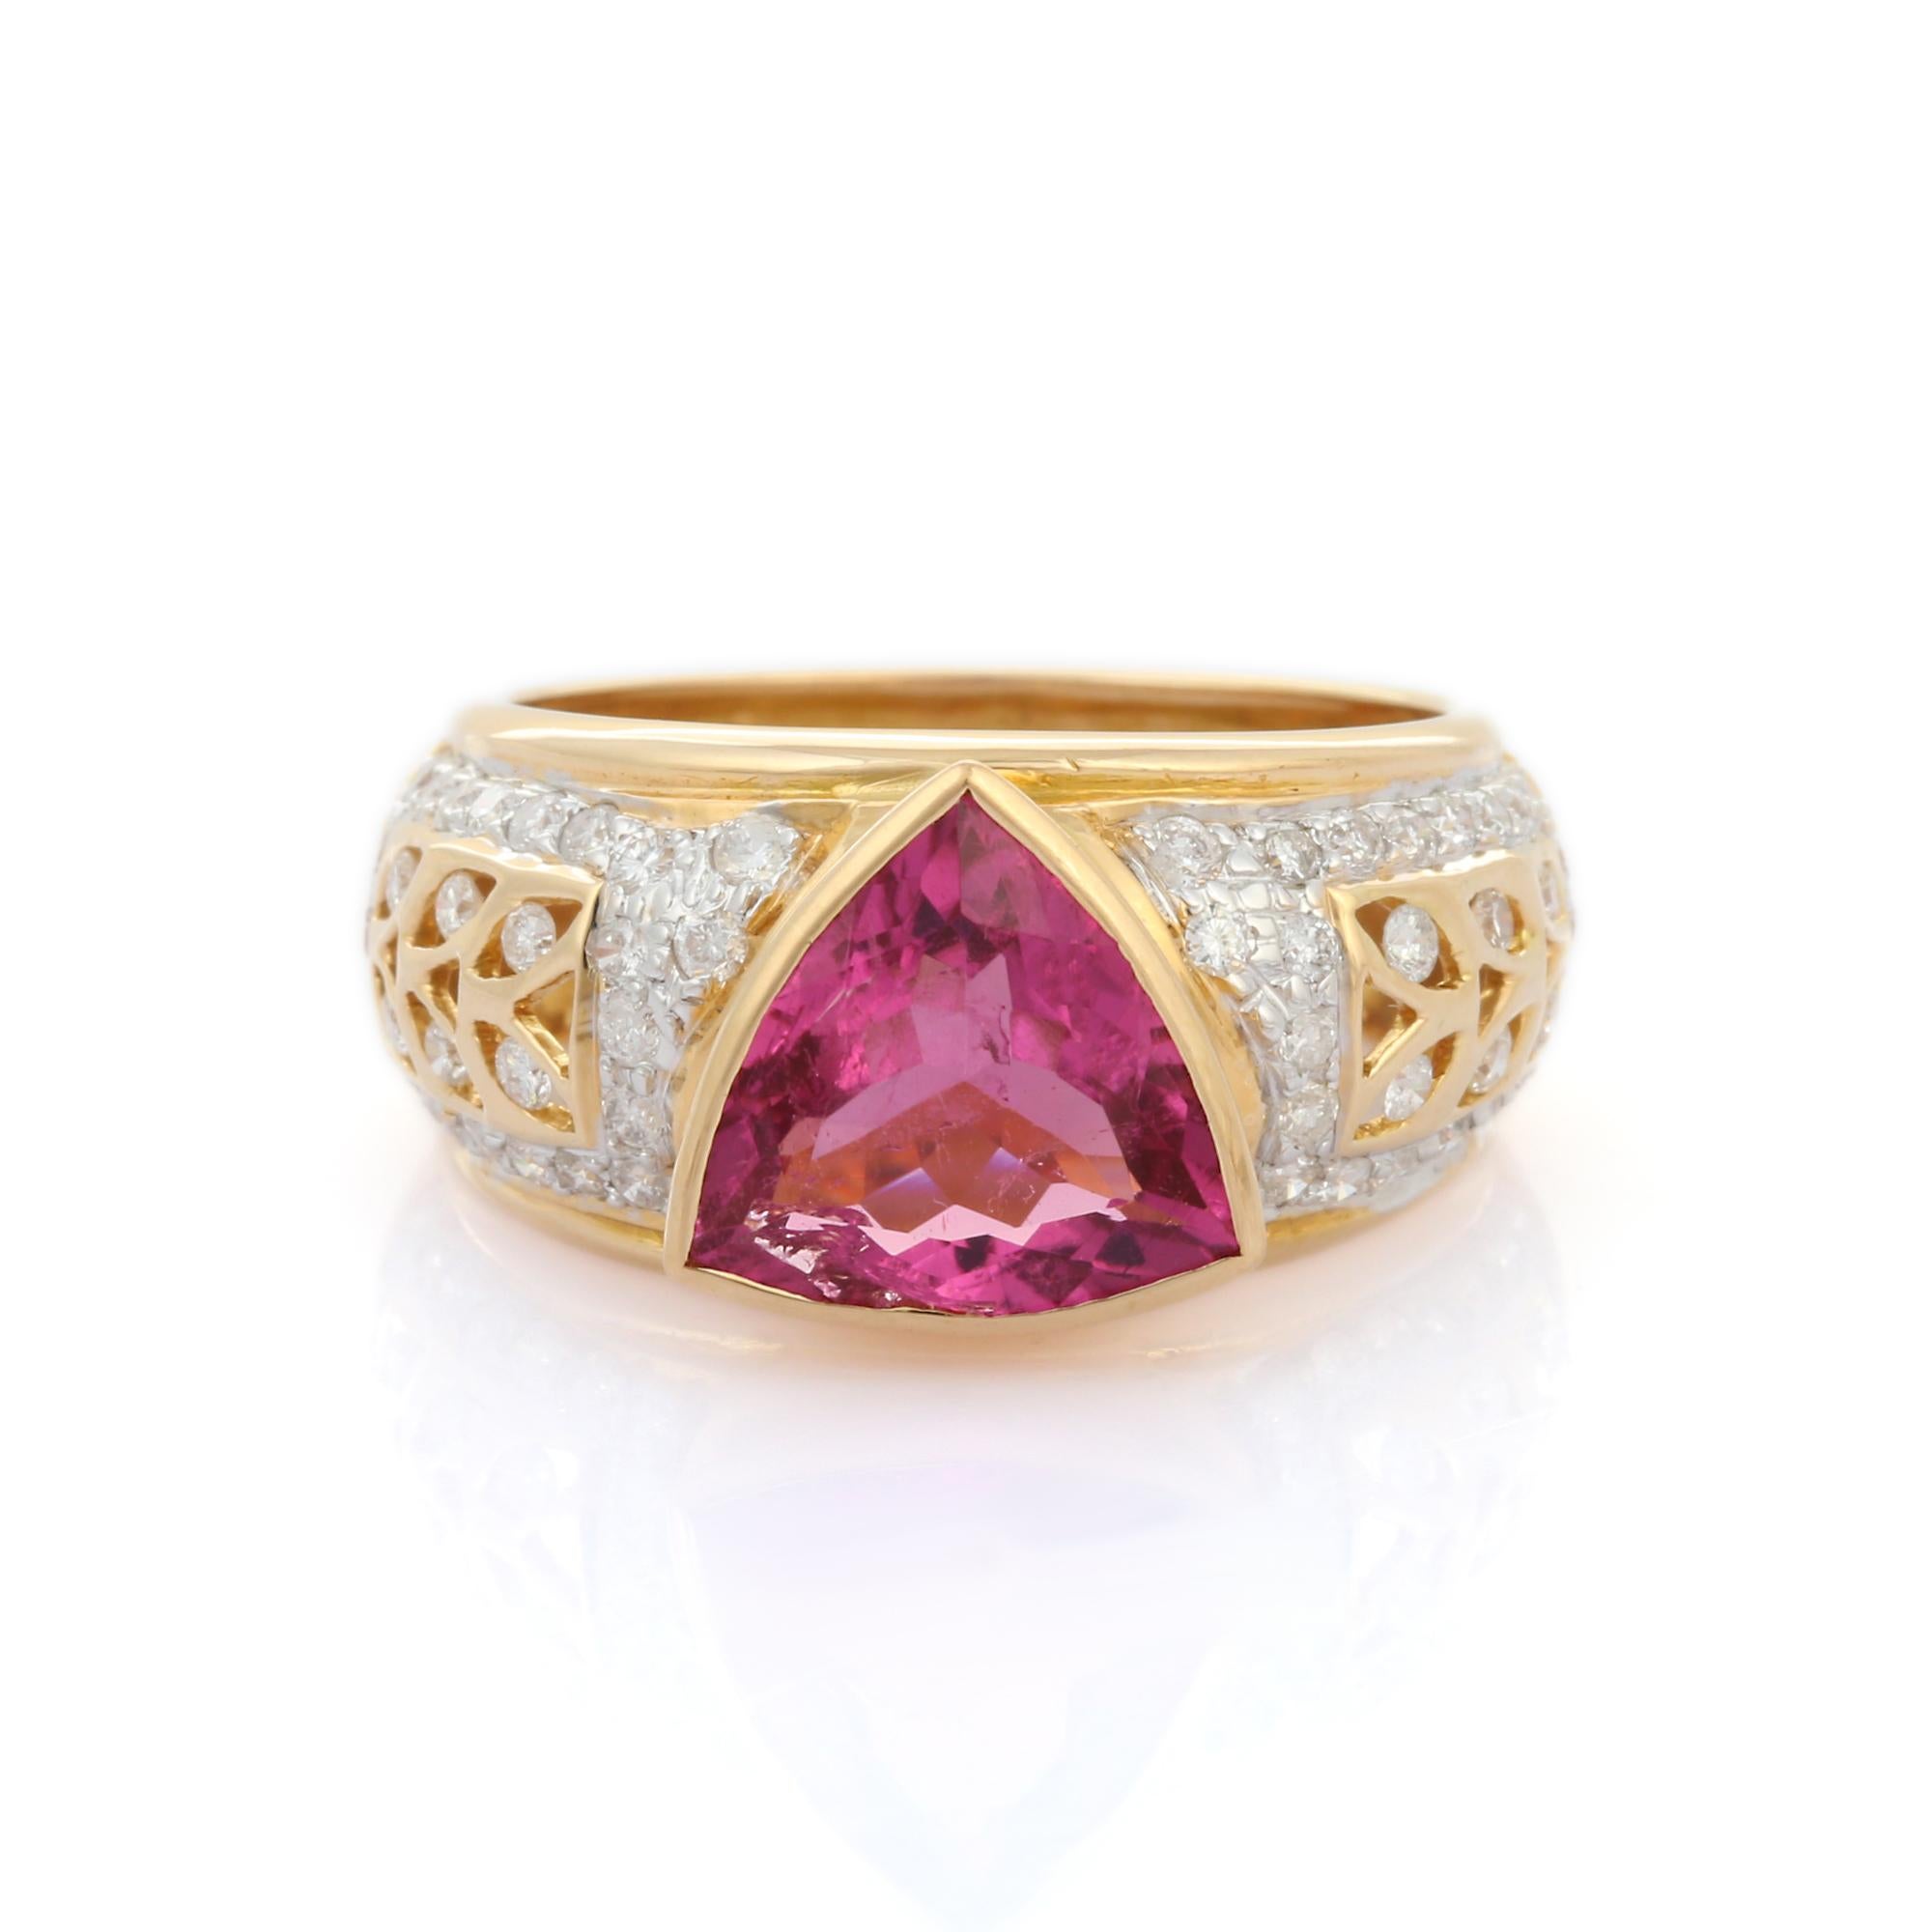 For Sale:  2.81 Carat Trillion cut Ruby Diamond Bridal Ring in 18K Yellow Gold  9